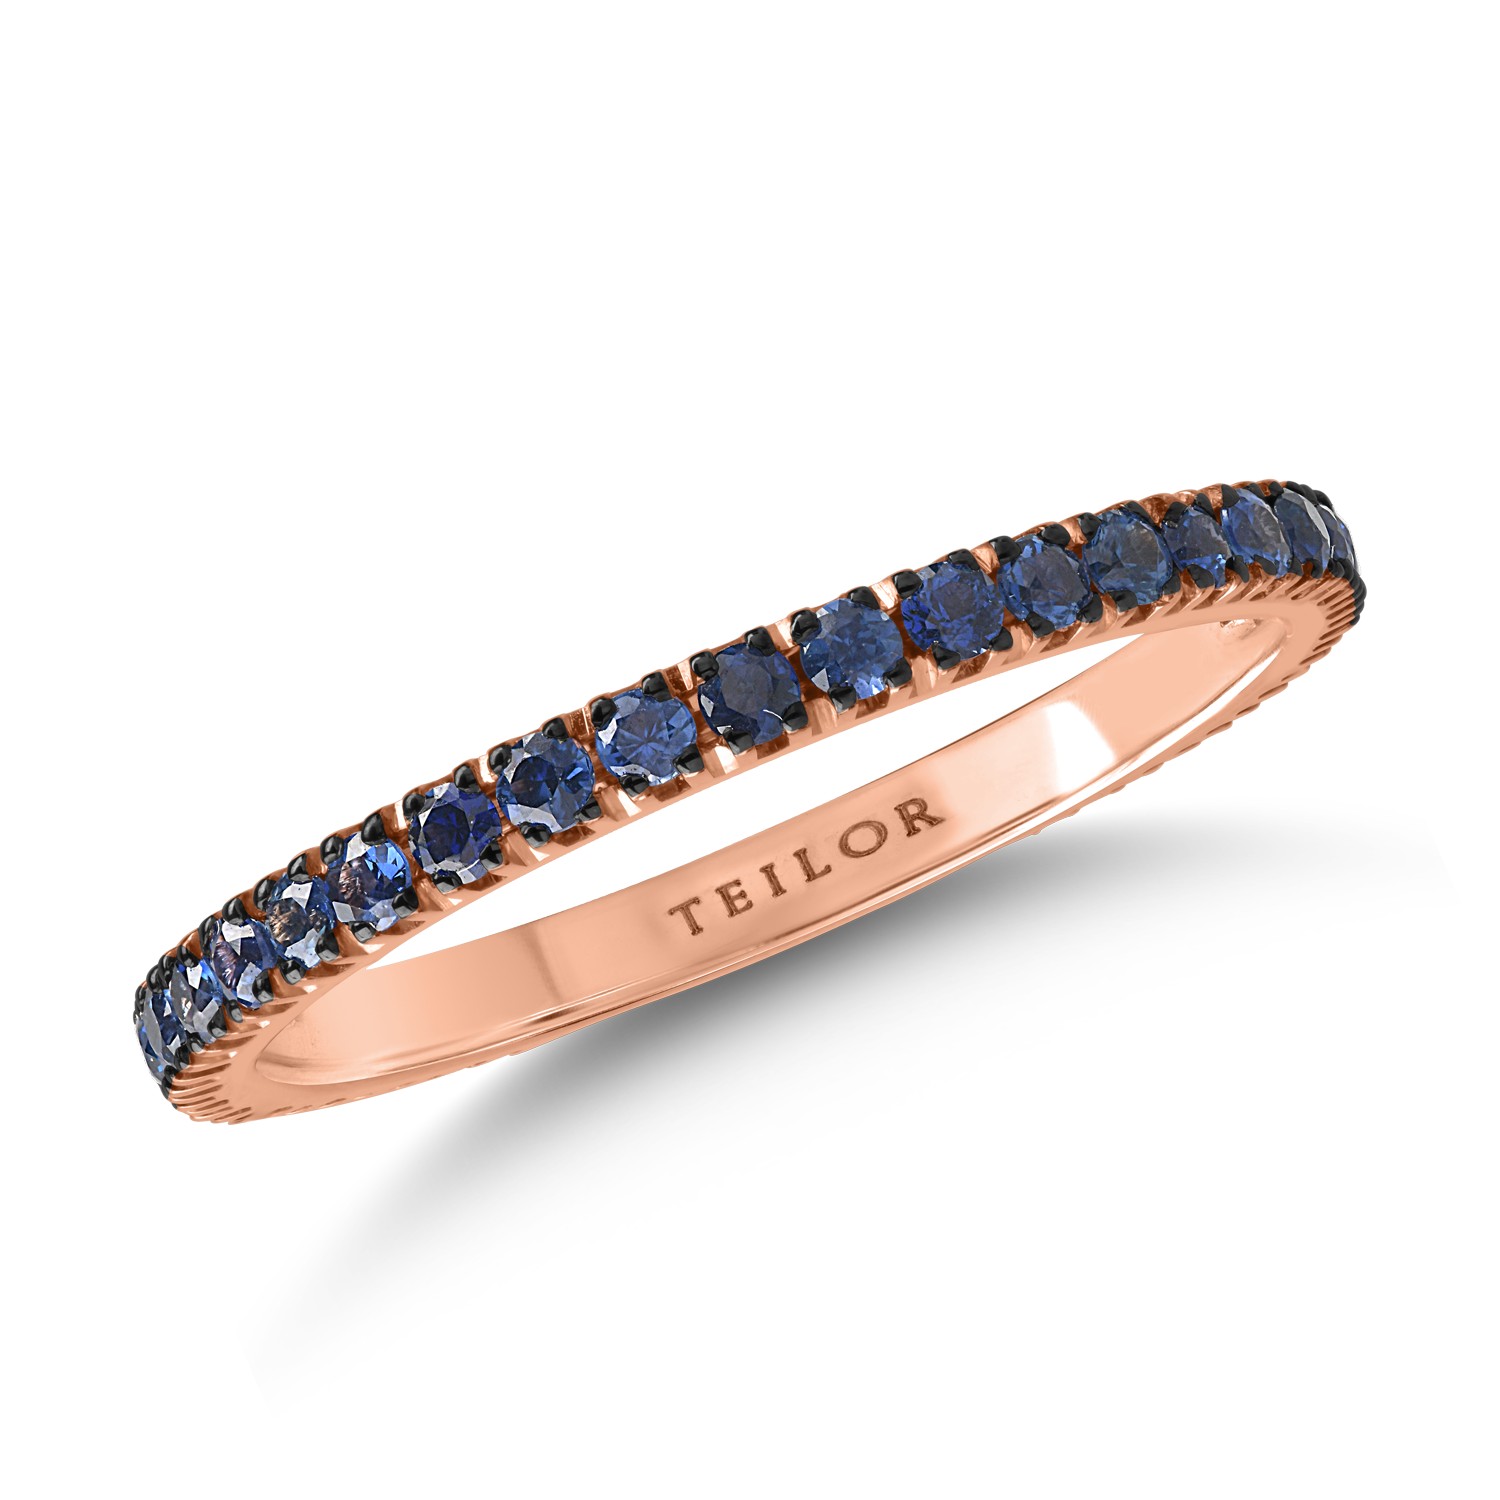 Eternity ring in rose gold with 0.68ct sapphires